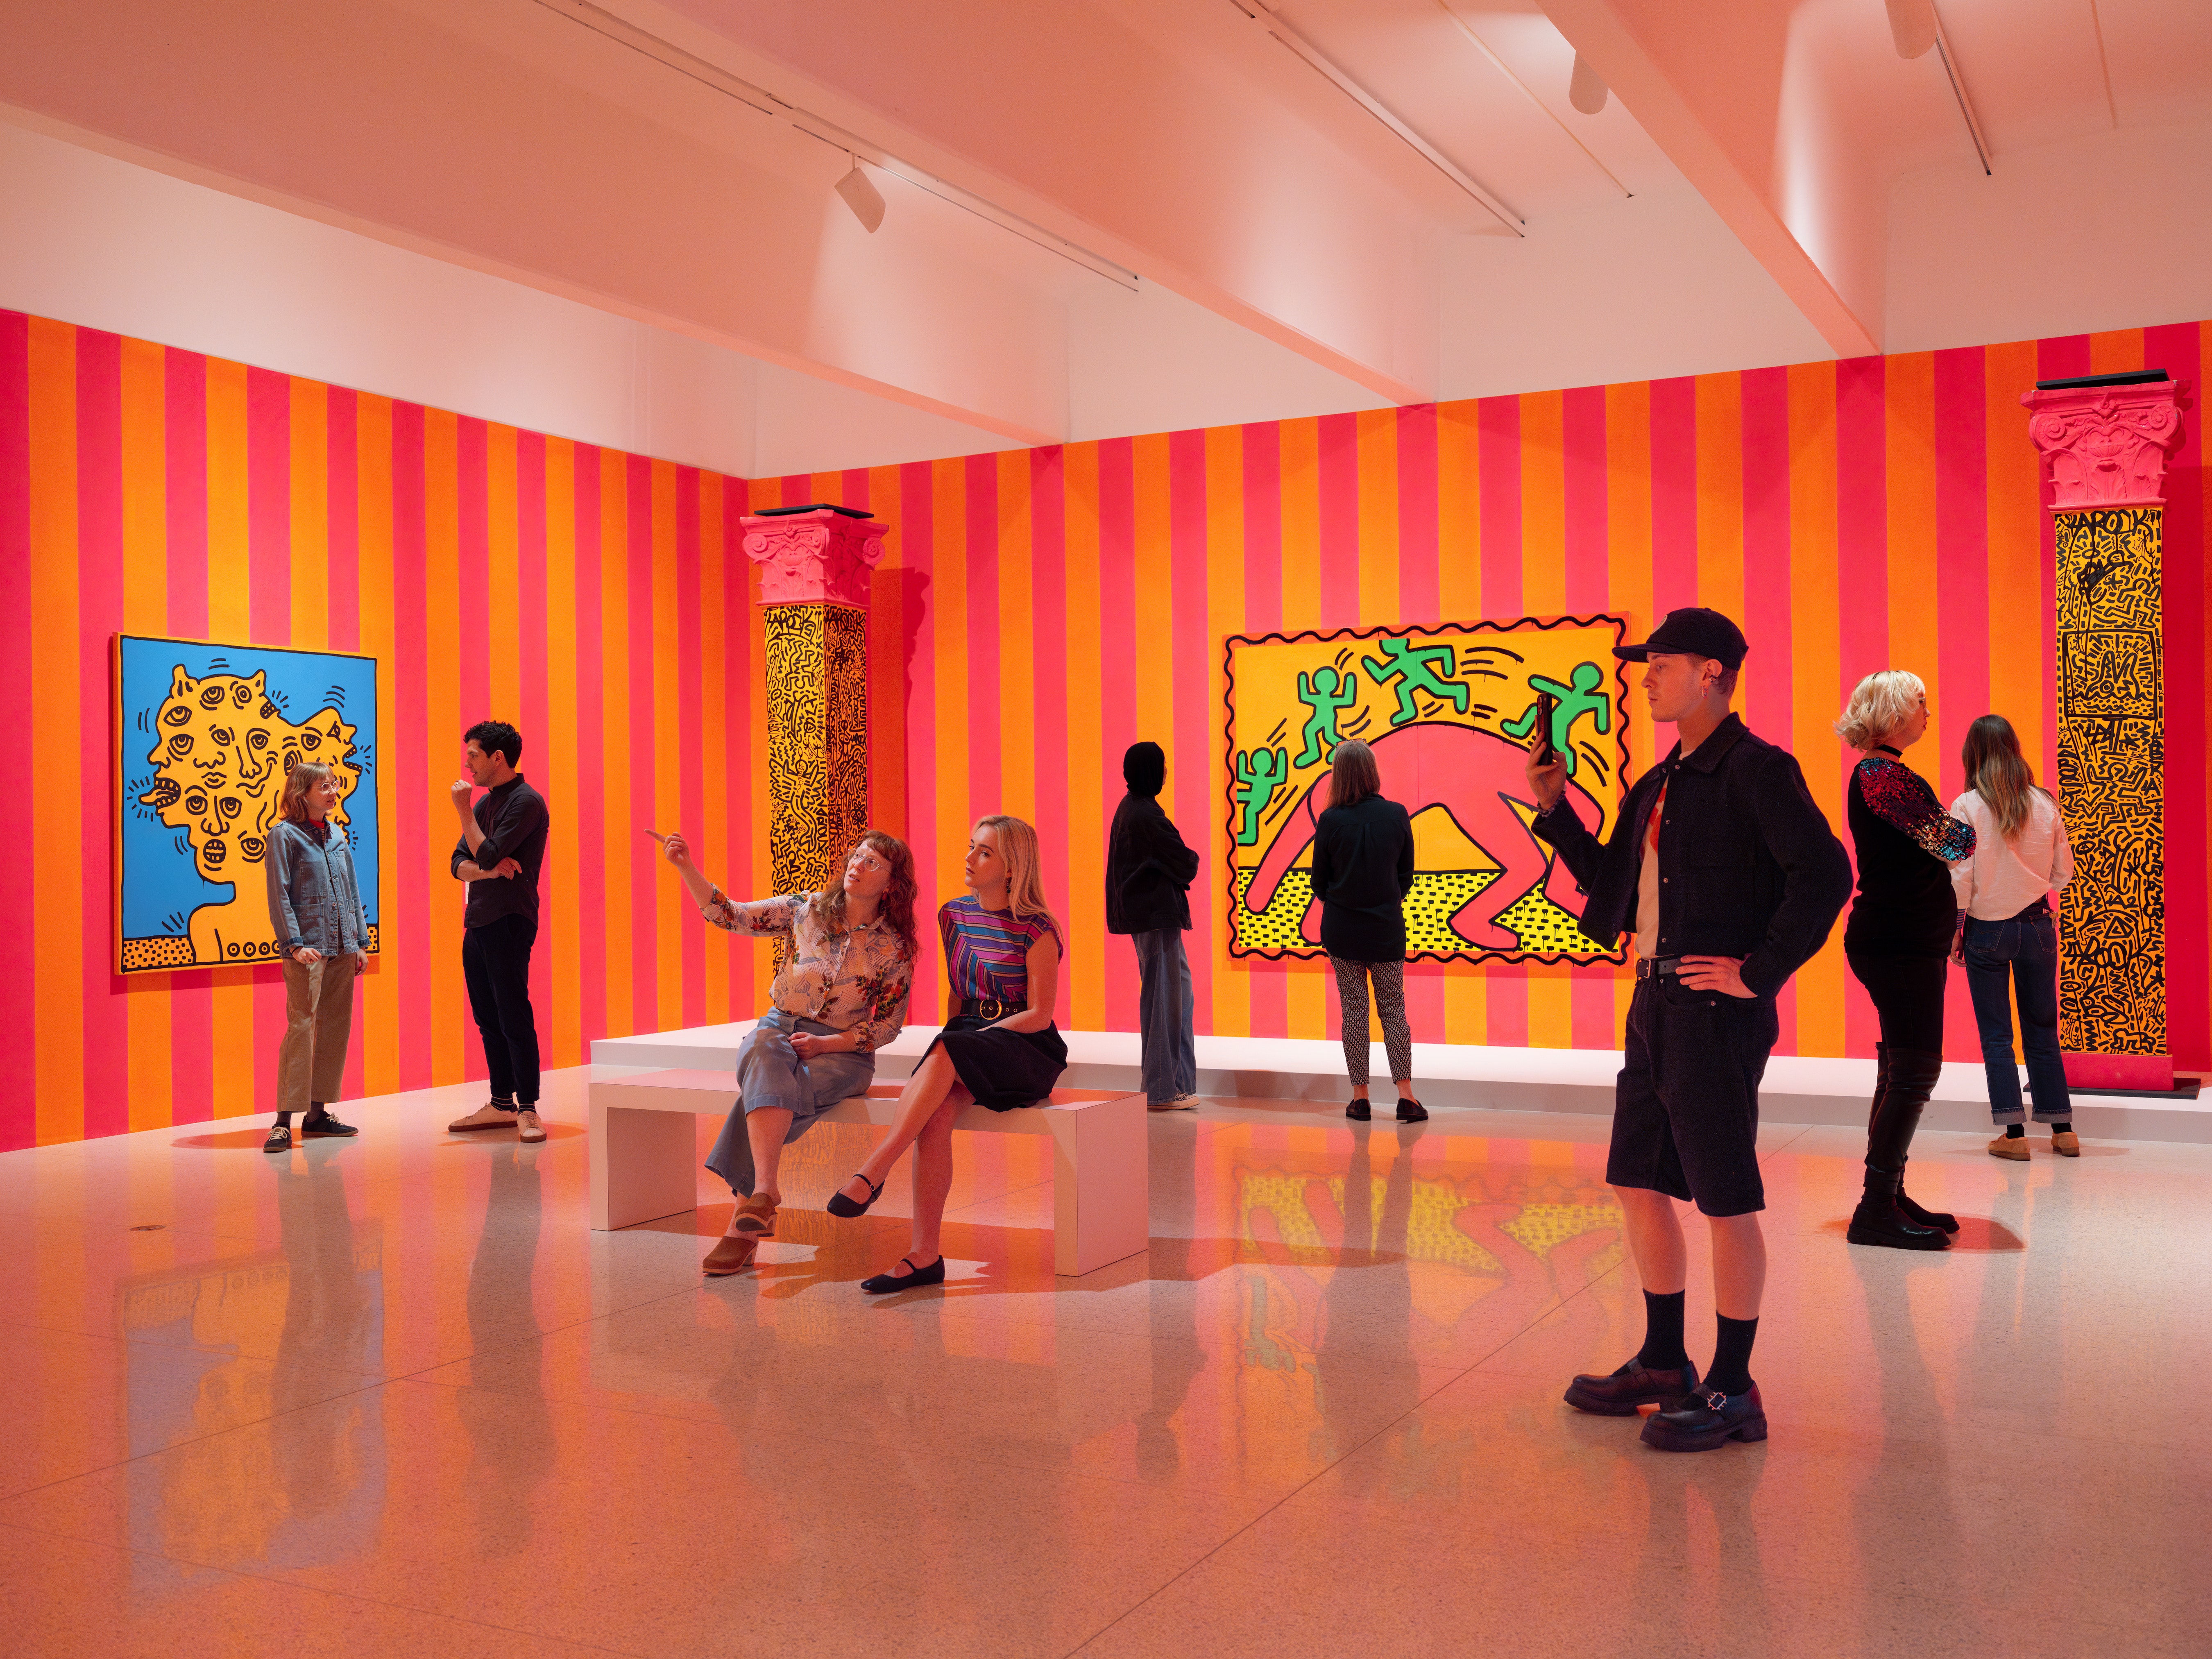 People in a brightly colored gallery looking at art.